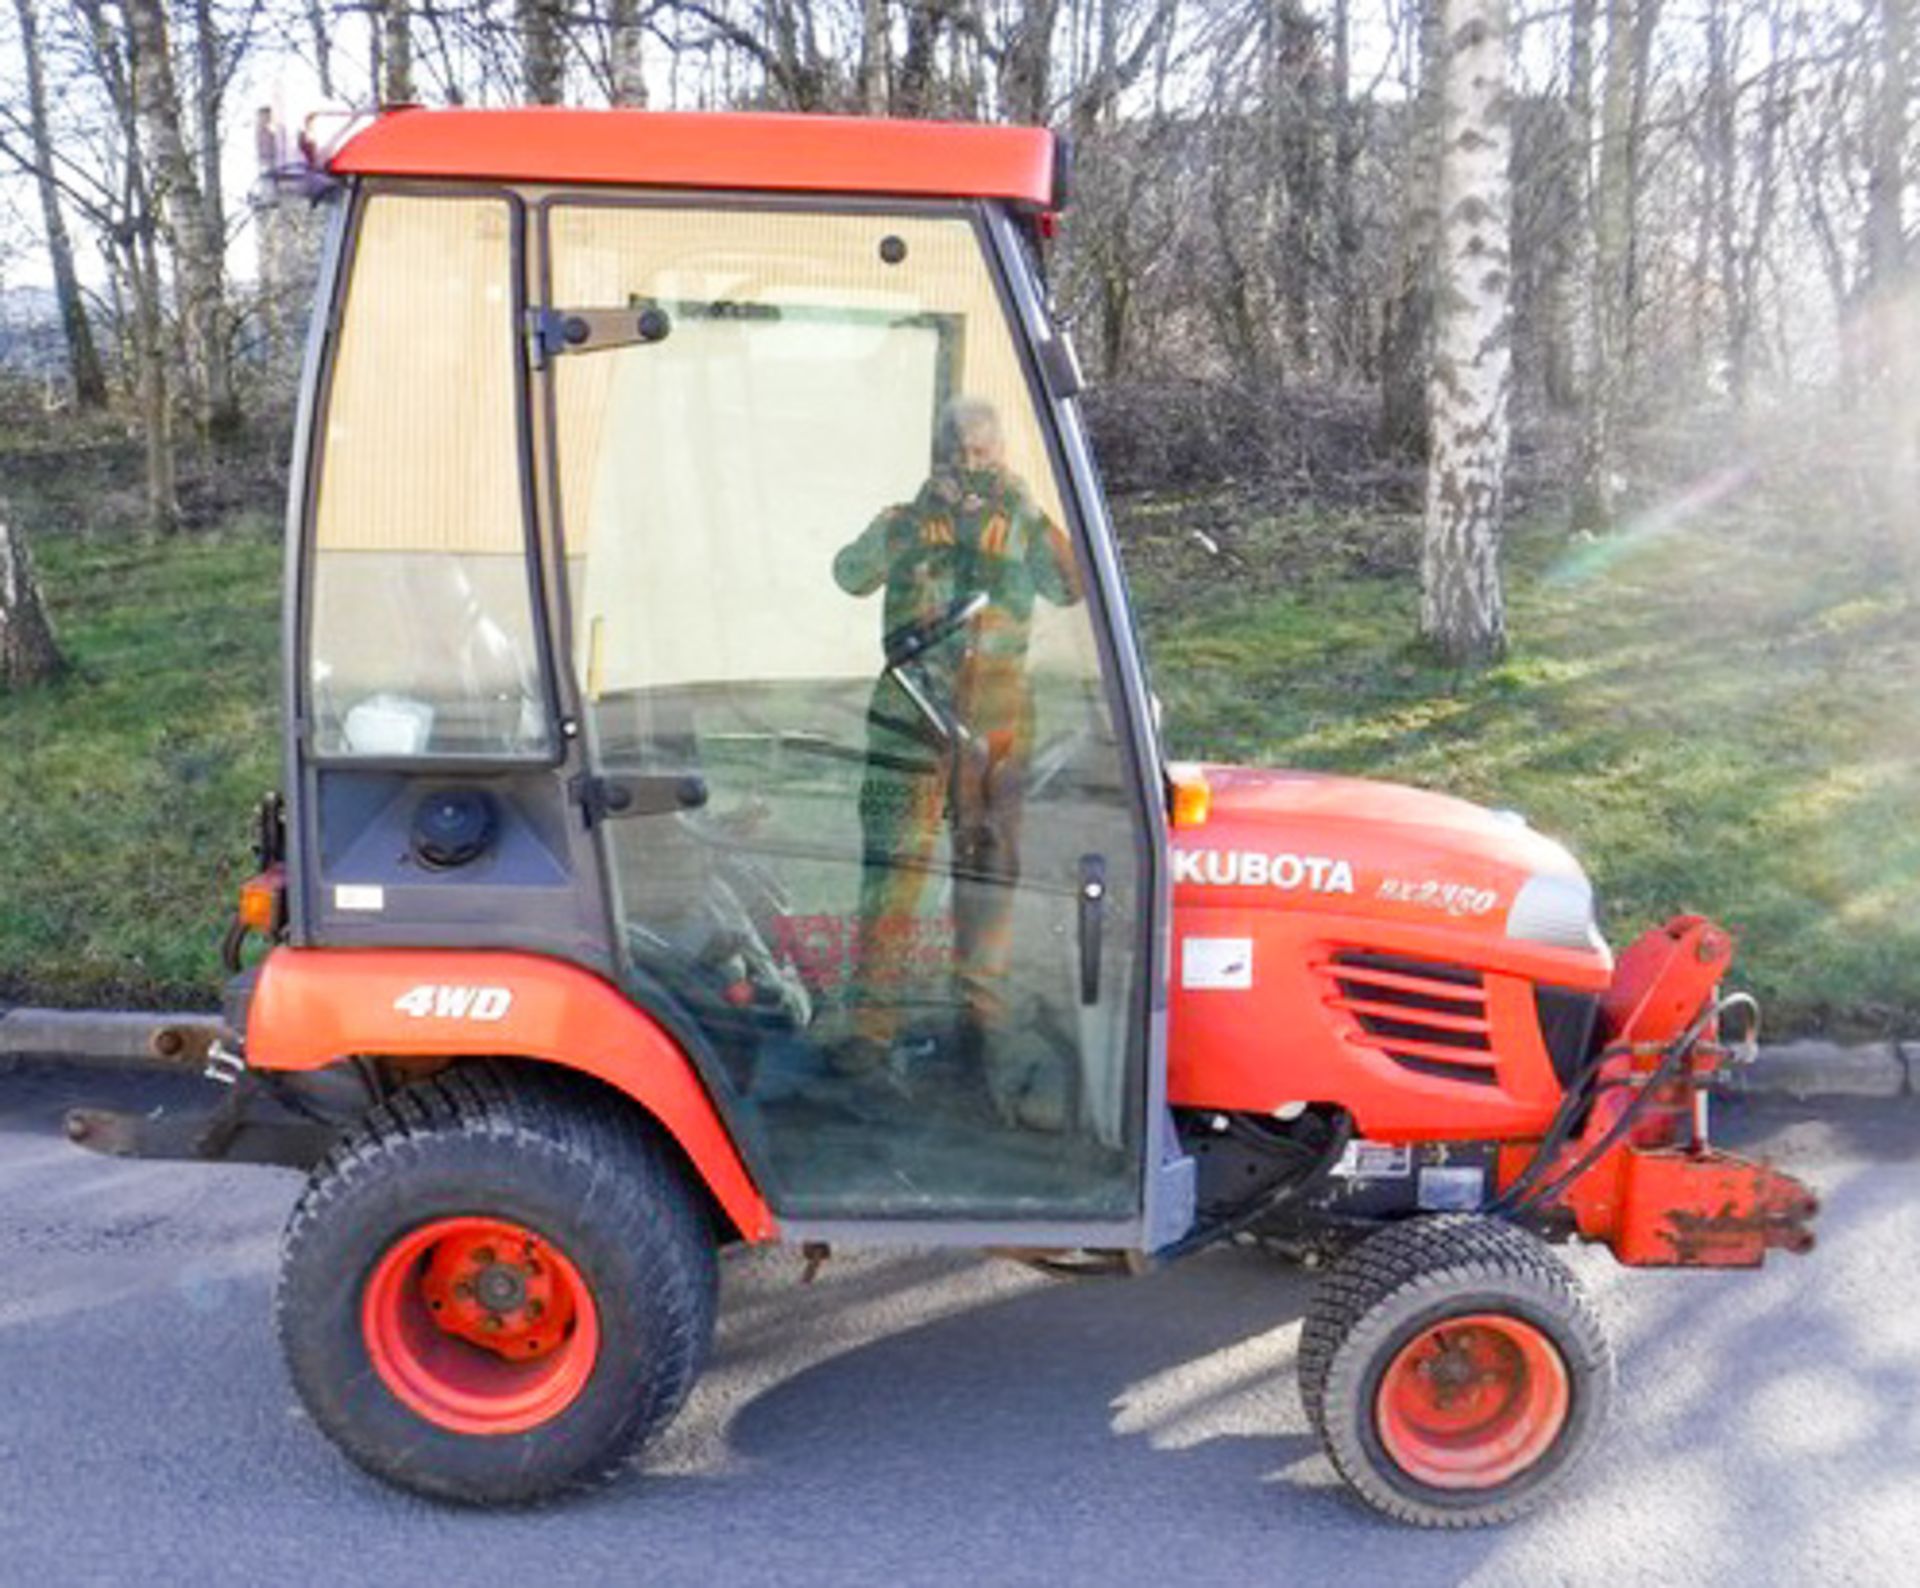 2011 KUBOTA BX2350 MINI TRACTOR REG SN61EJE, 238.7HRS (NOT VERIFIED) DOCUMENTS IN OFFICE - Image 2 of 3